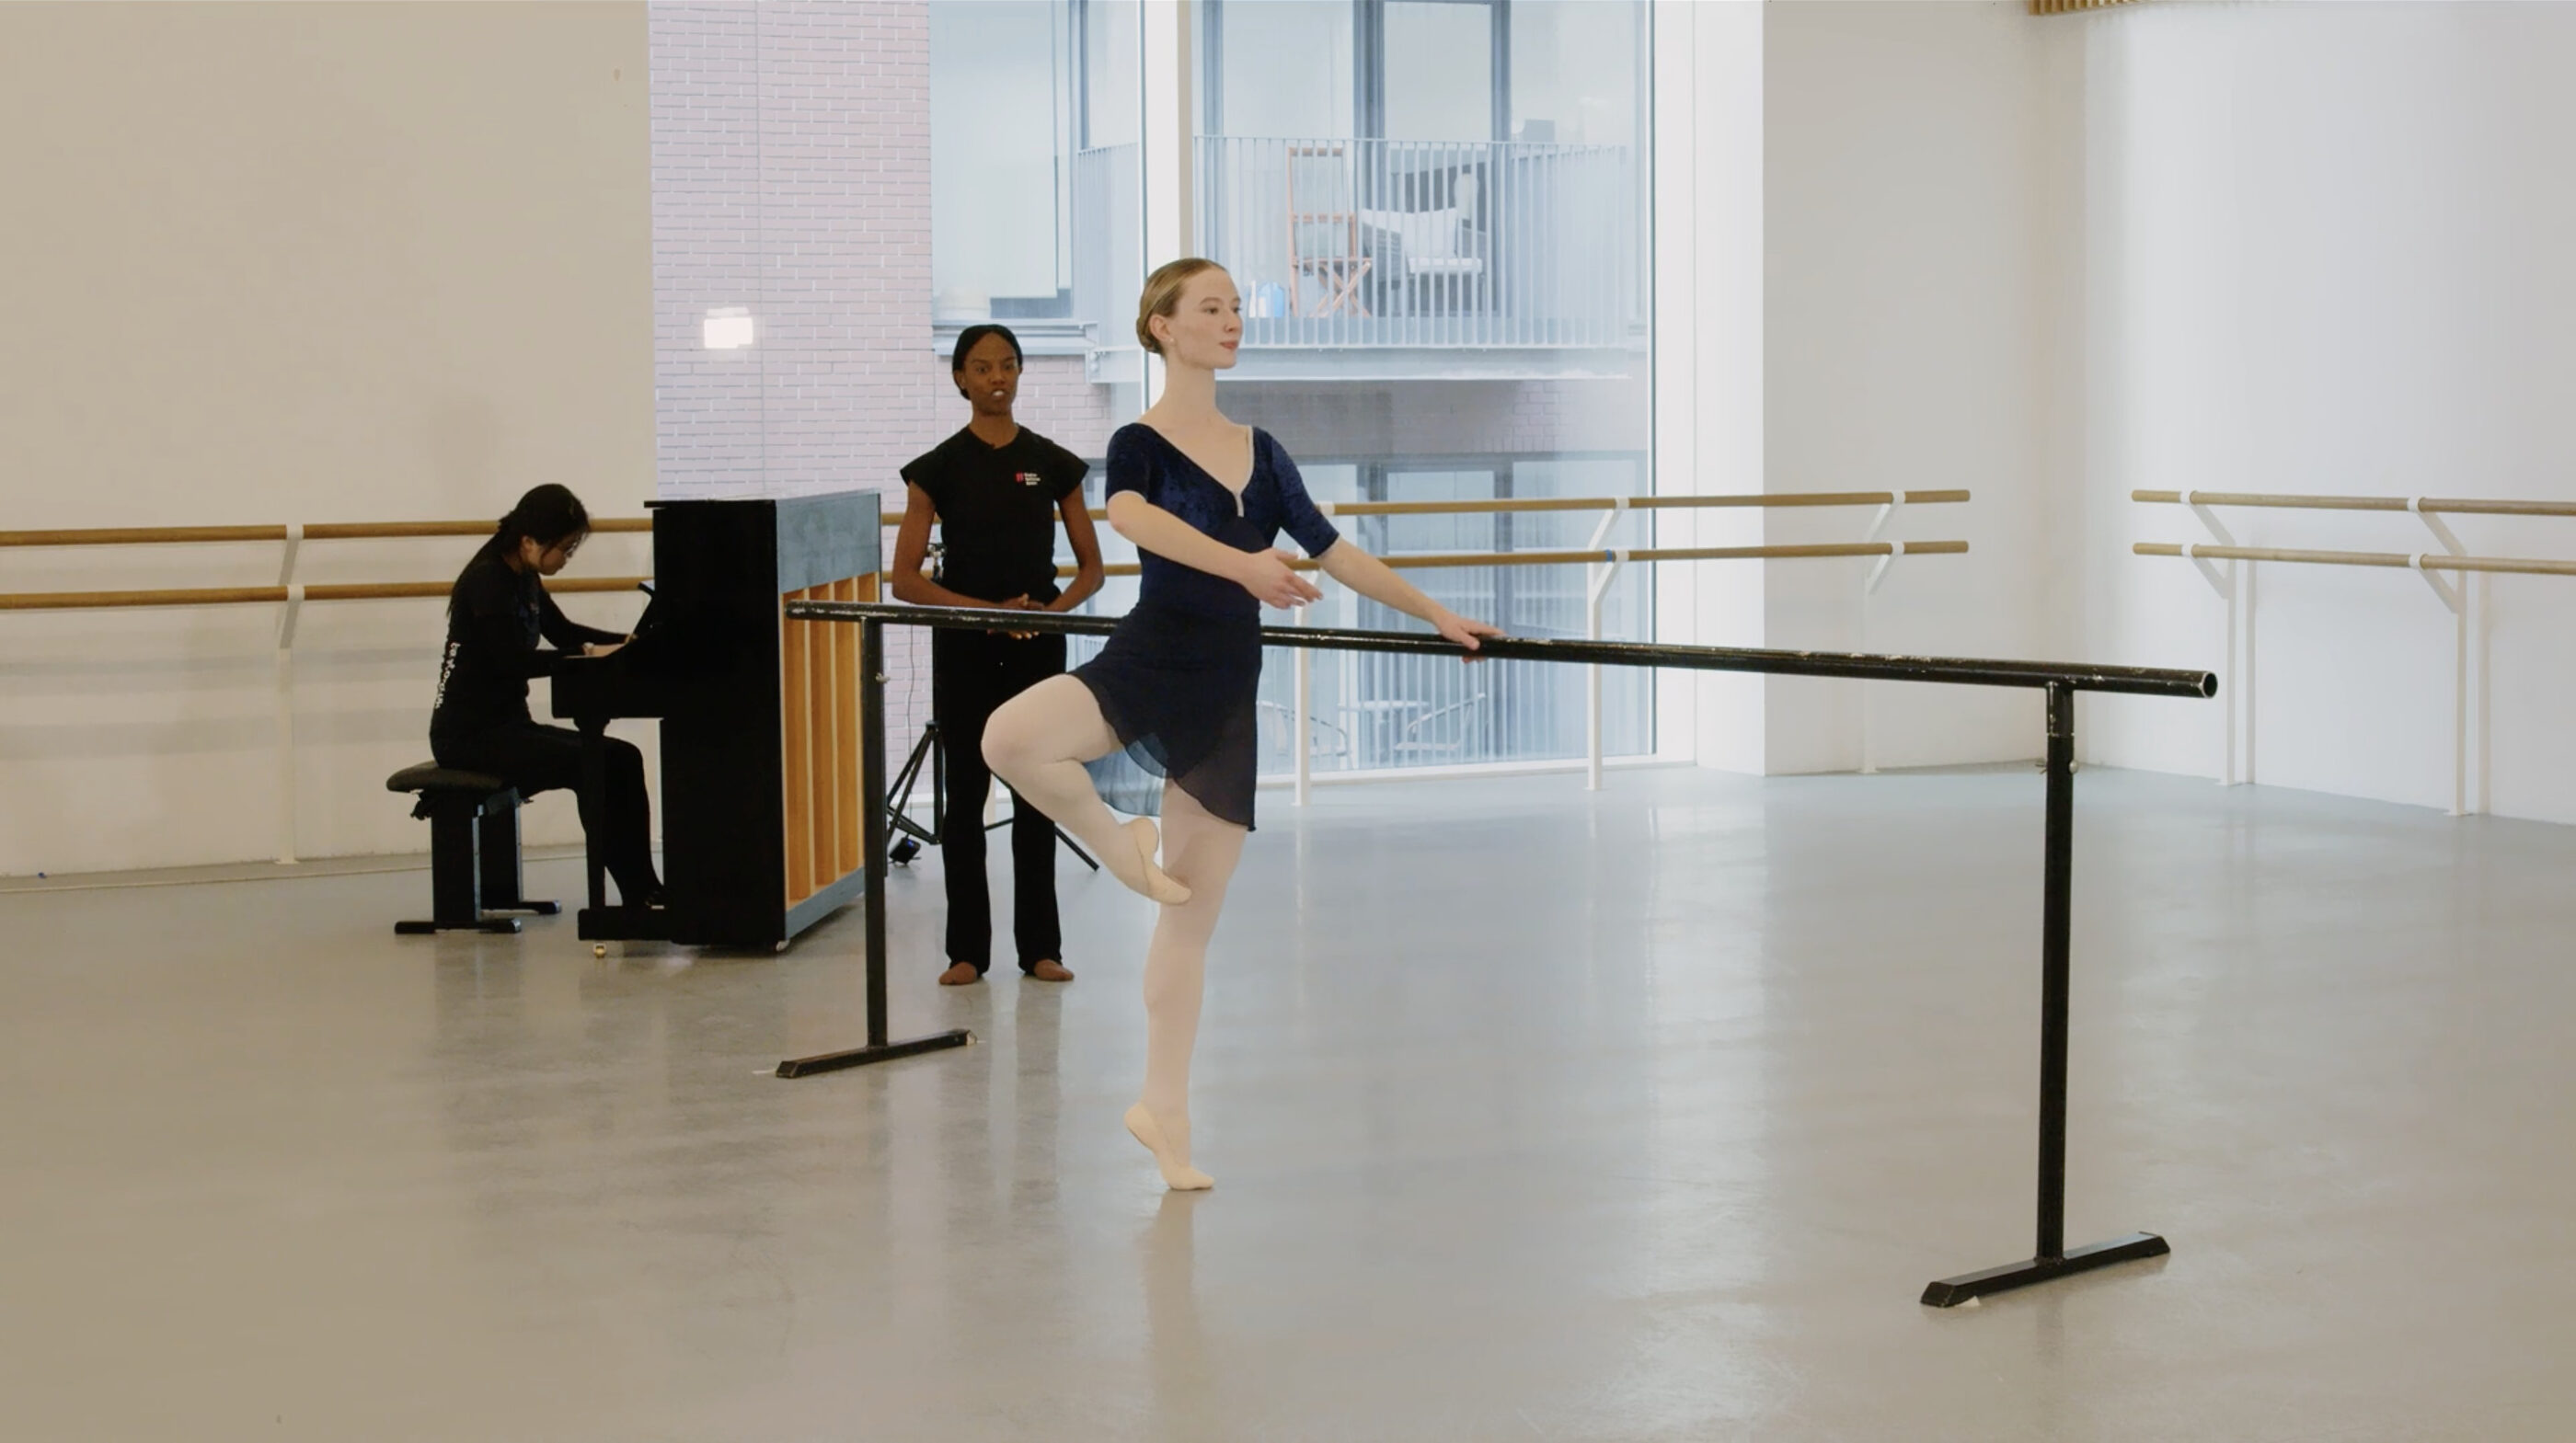 A ballet demonstrator is standing in retire position at the barre.